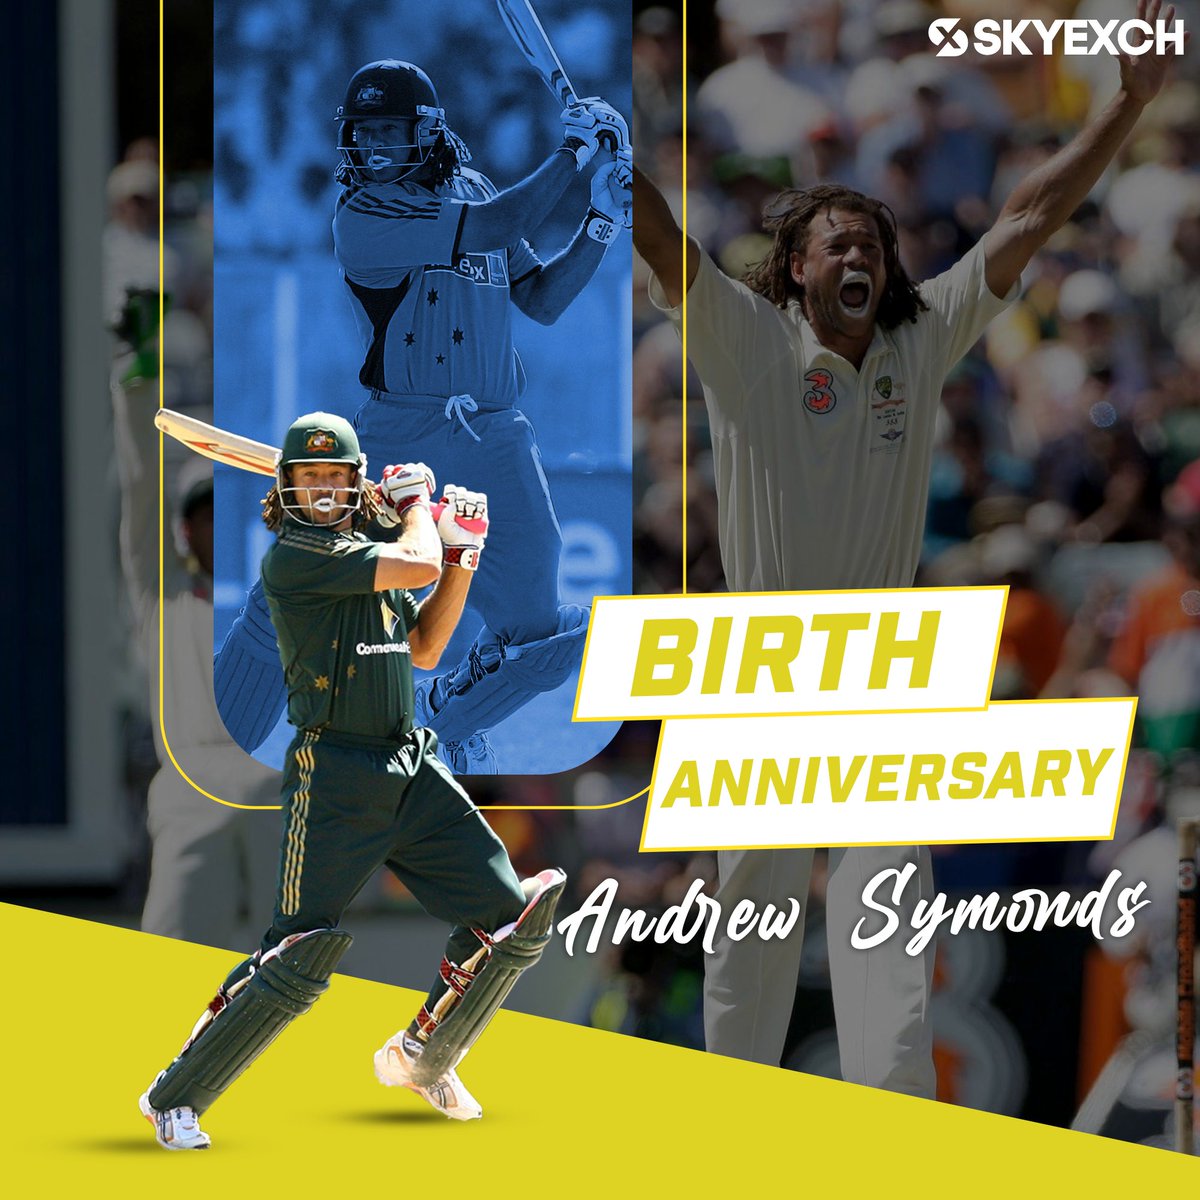 Remembering Andrew Symonds on his birth anniversary.

#AndrewSymonds #BirthAnniversary #cricket #SkyExch